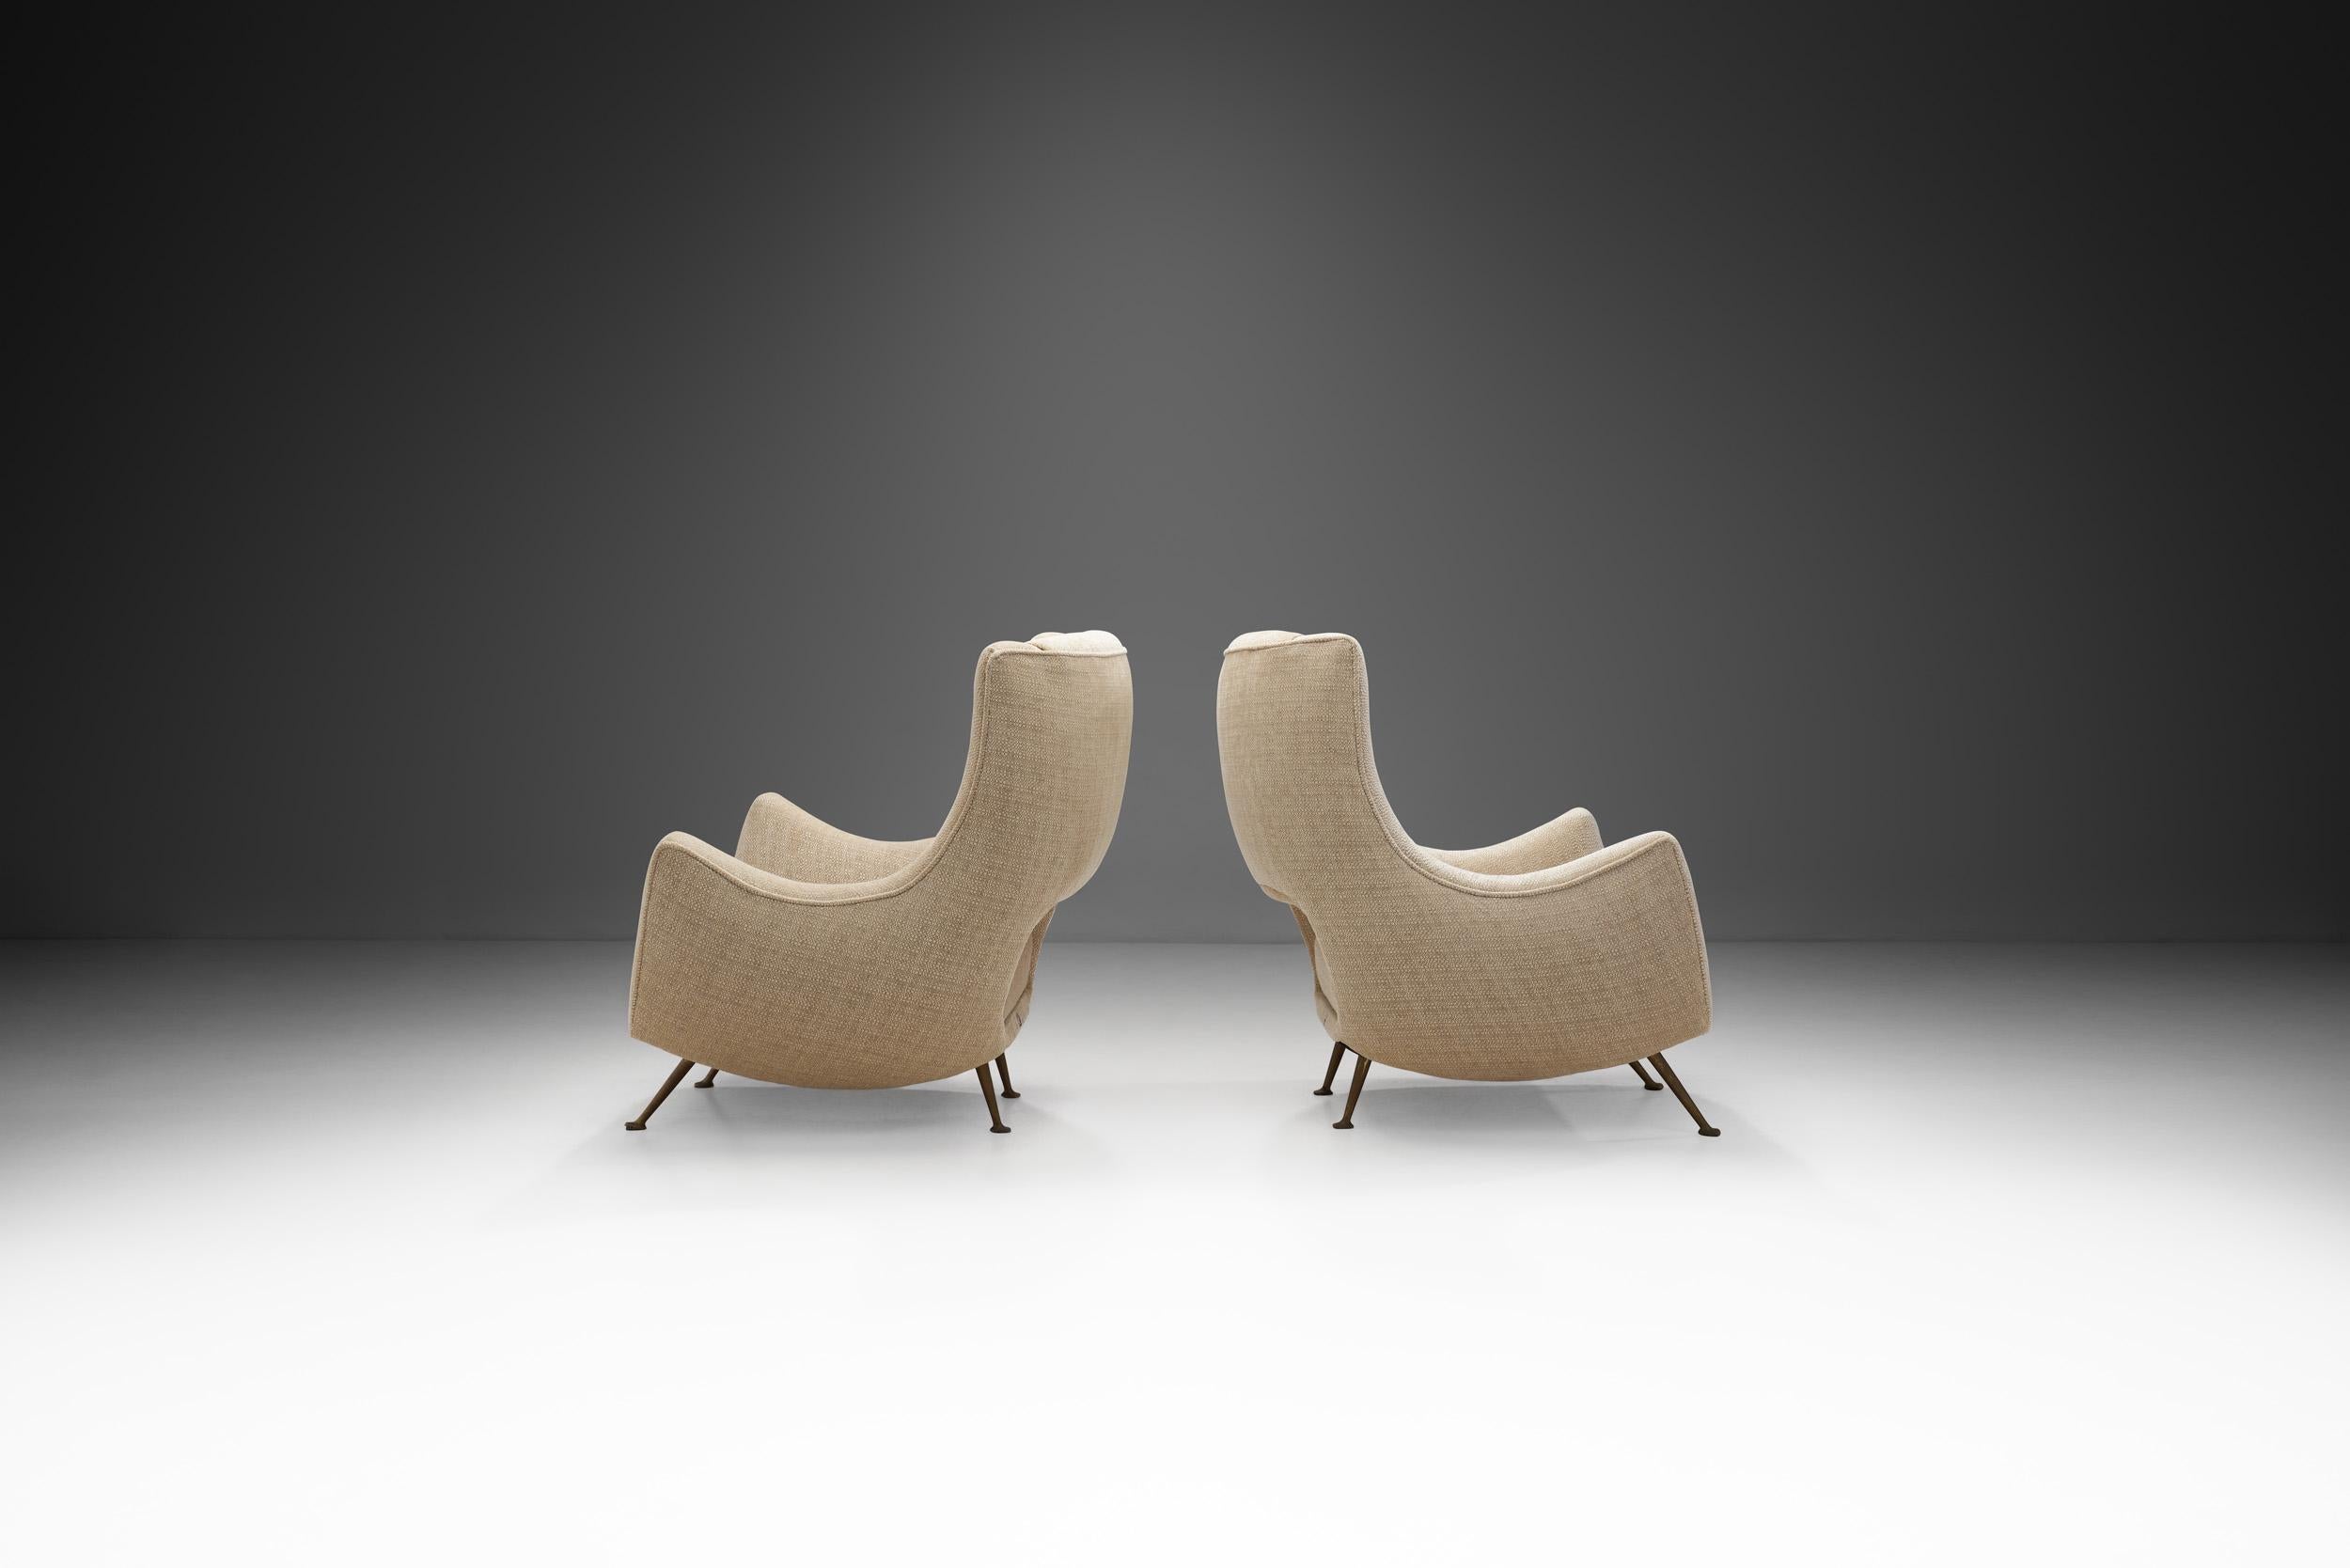 20th Century Italian Modern Lounge Chairs with Brass Legs by ISA Bergamo, Italy 1950s For Sale